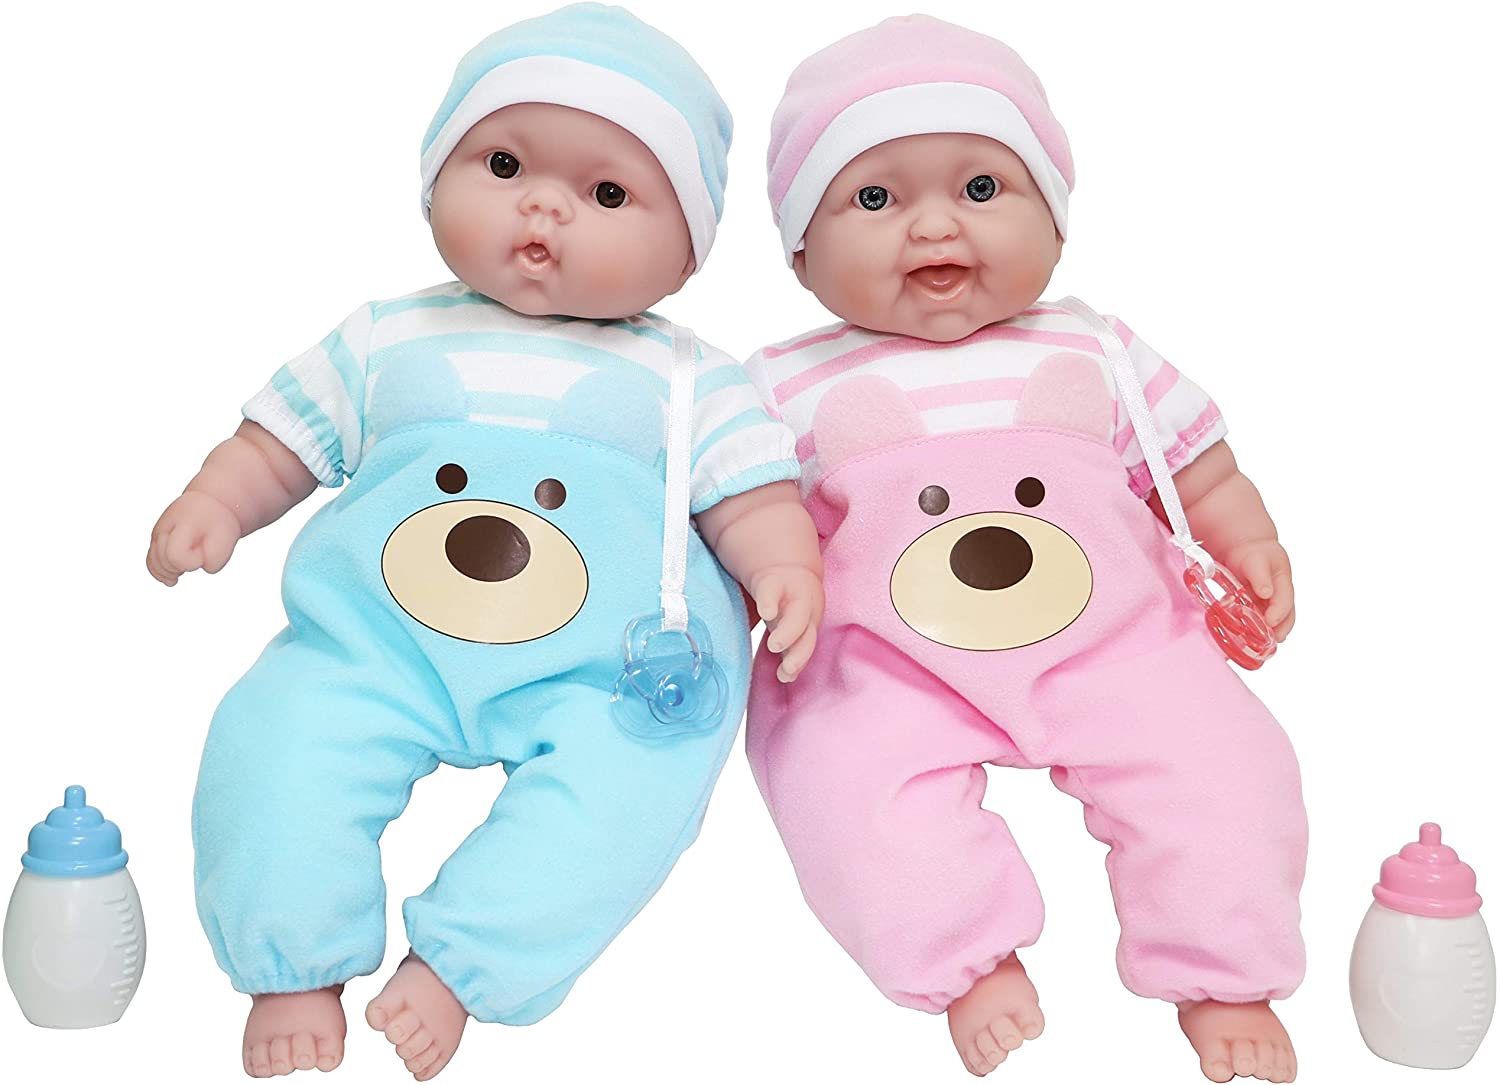 JC Toys Huggable Twin Baby Dolls For 3-Year-Old Girls, 13-Inch